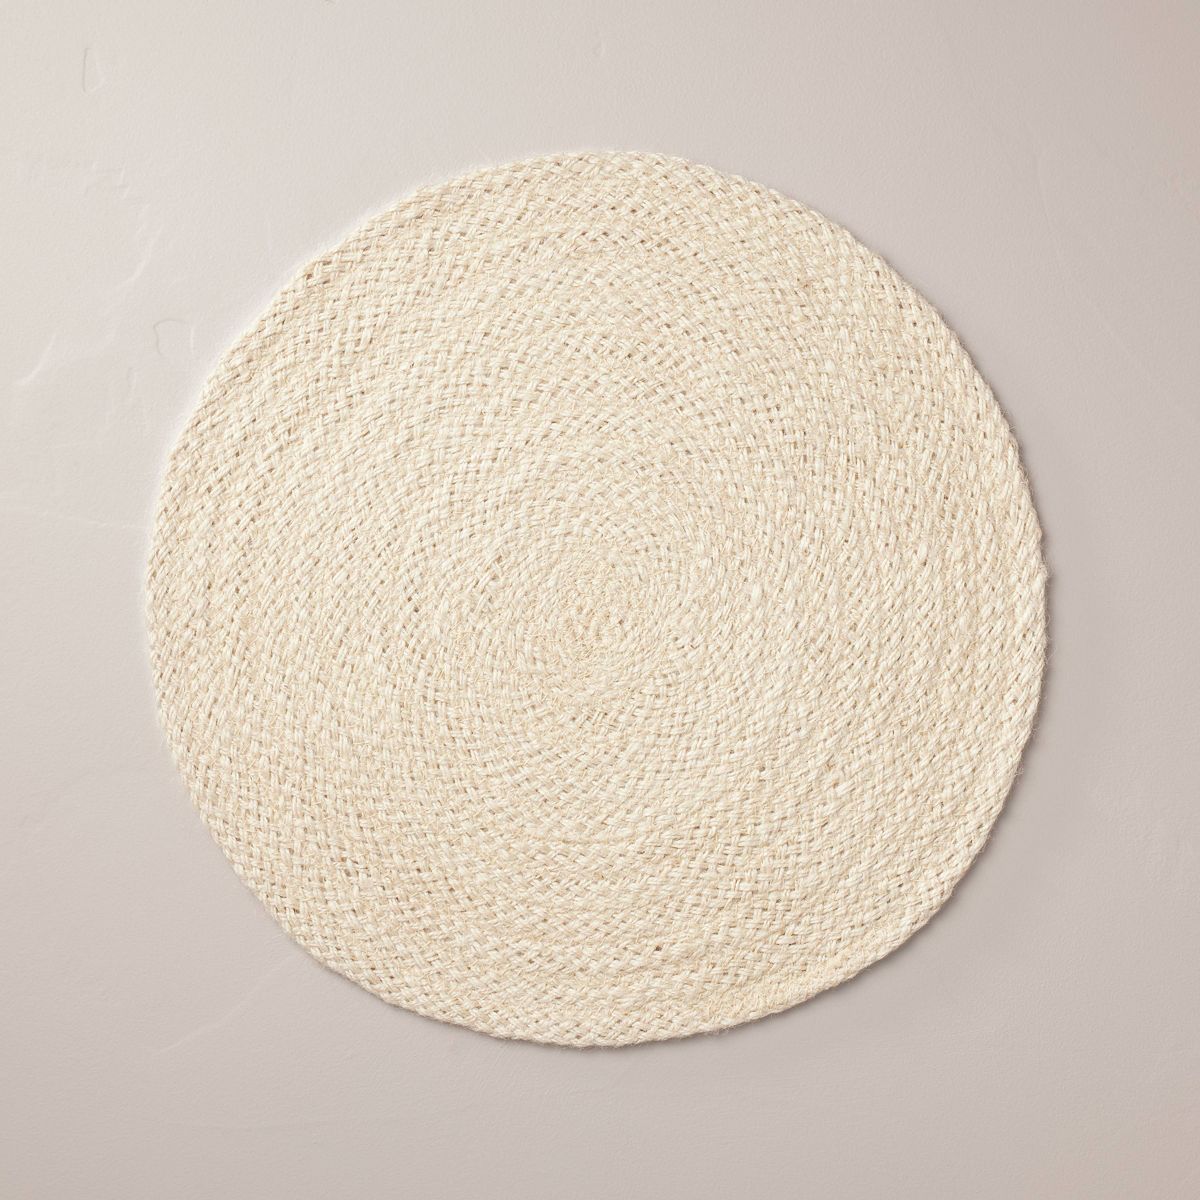 15" Bleached Jute Braided Charger Placemat - Hearth & Hand™ with Magnolia | Target